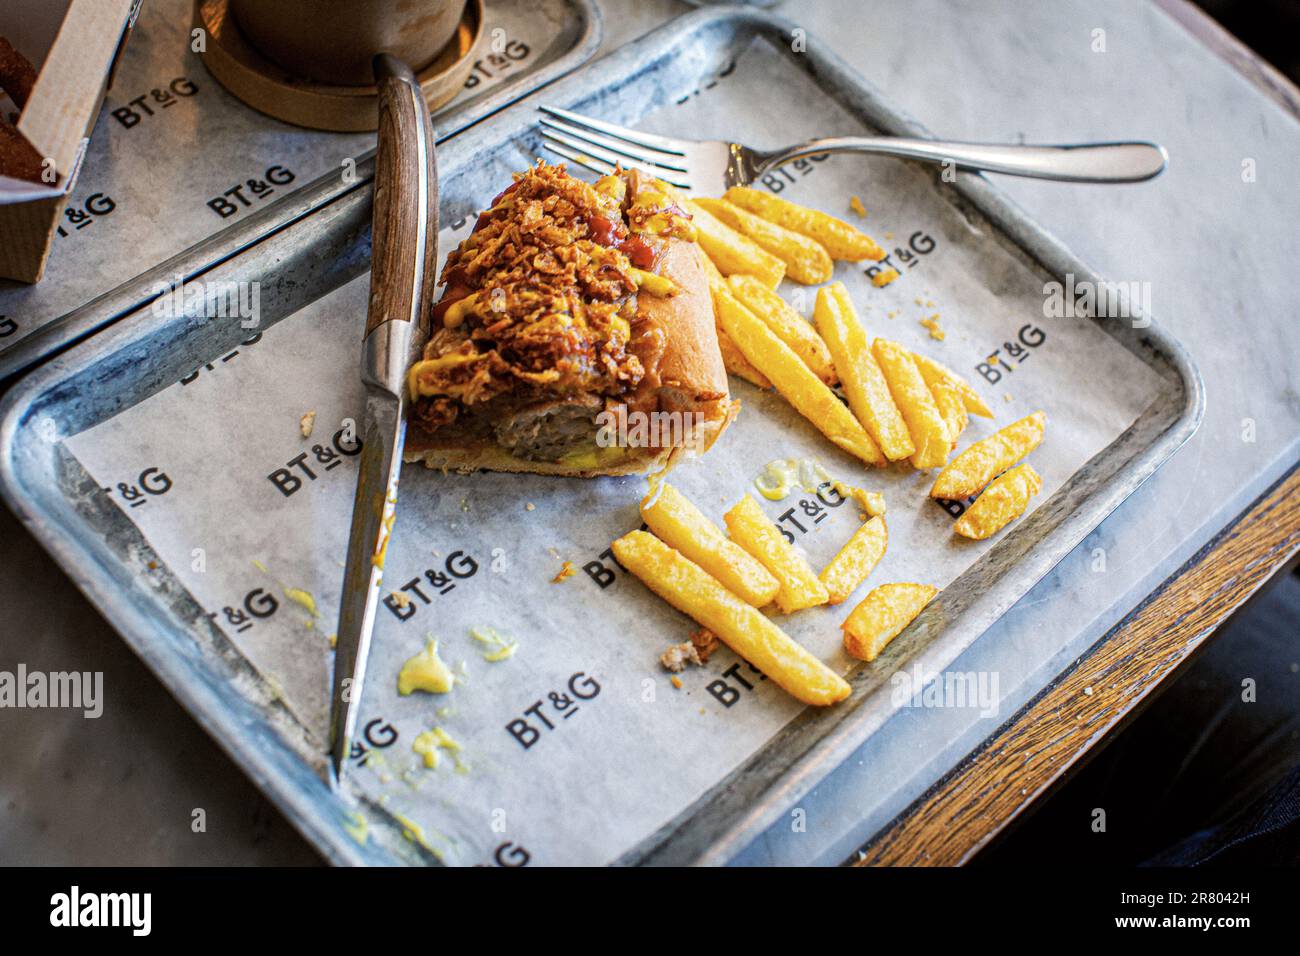 Hotdog and chips at The Butchers Tap and Grill in Marlow, Buckinghamshire, UK Stock Photo